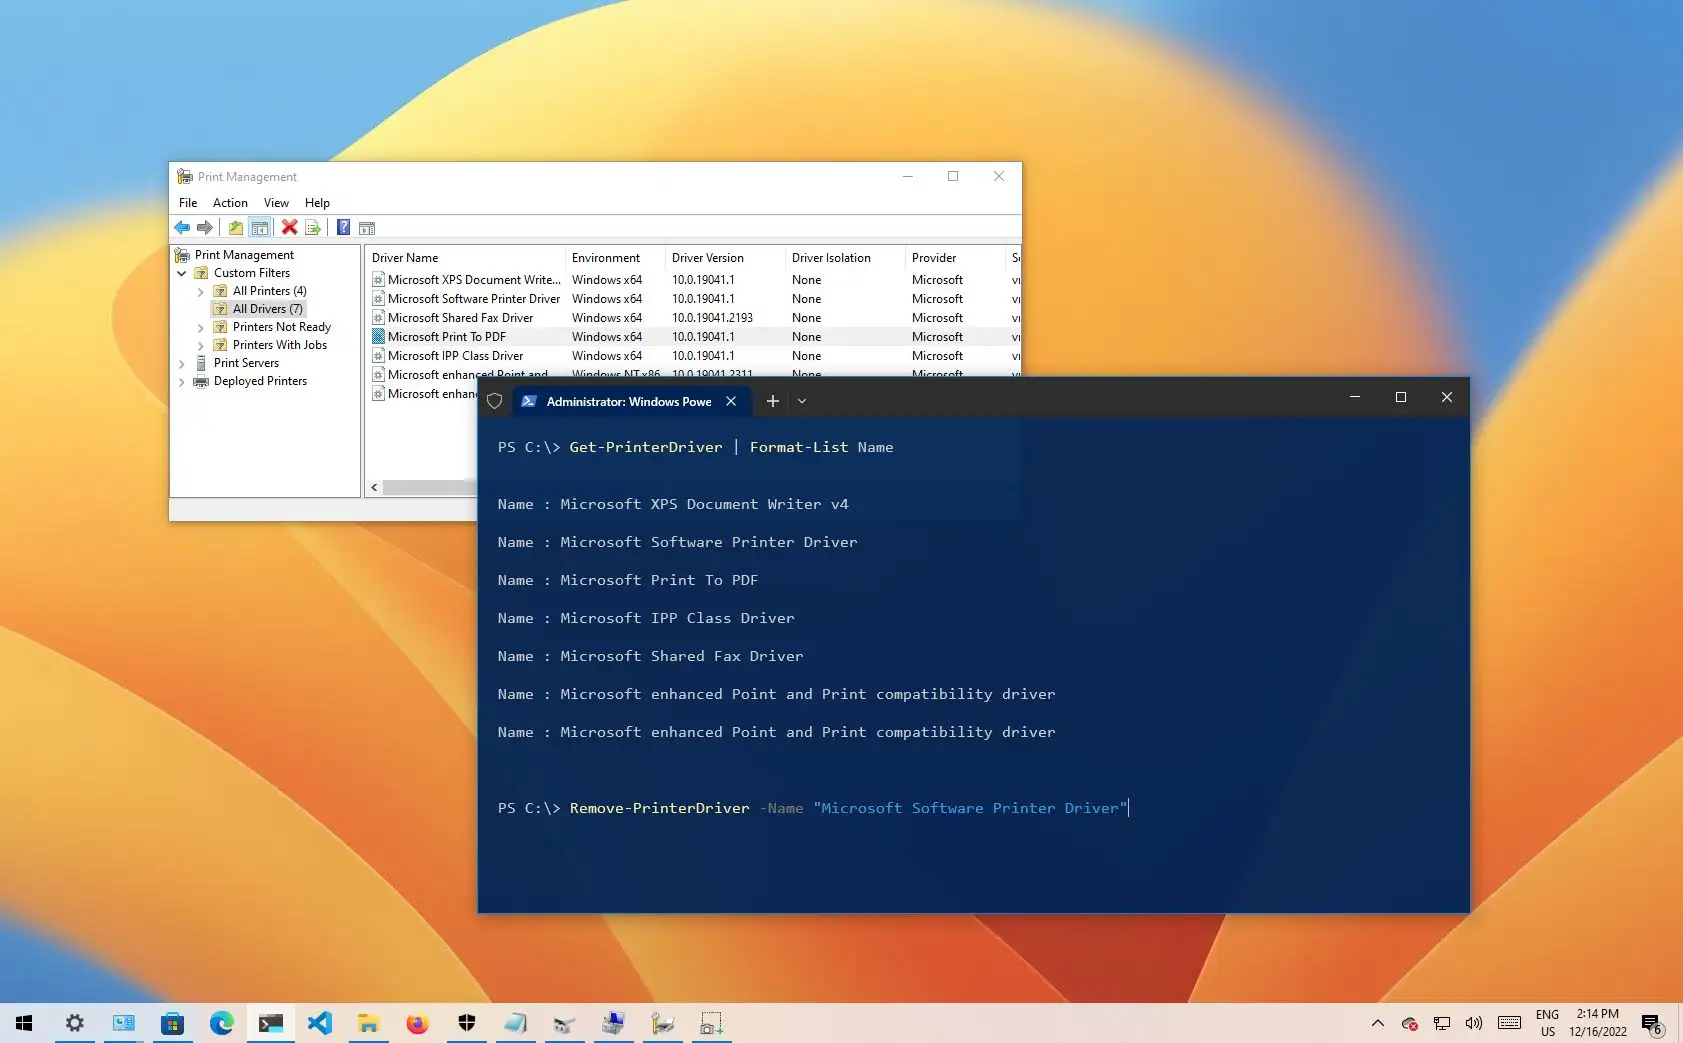 Pub stil Dwelling How to completely remove printer driver on Windows 10 - Pureinfotech